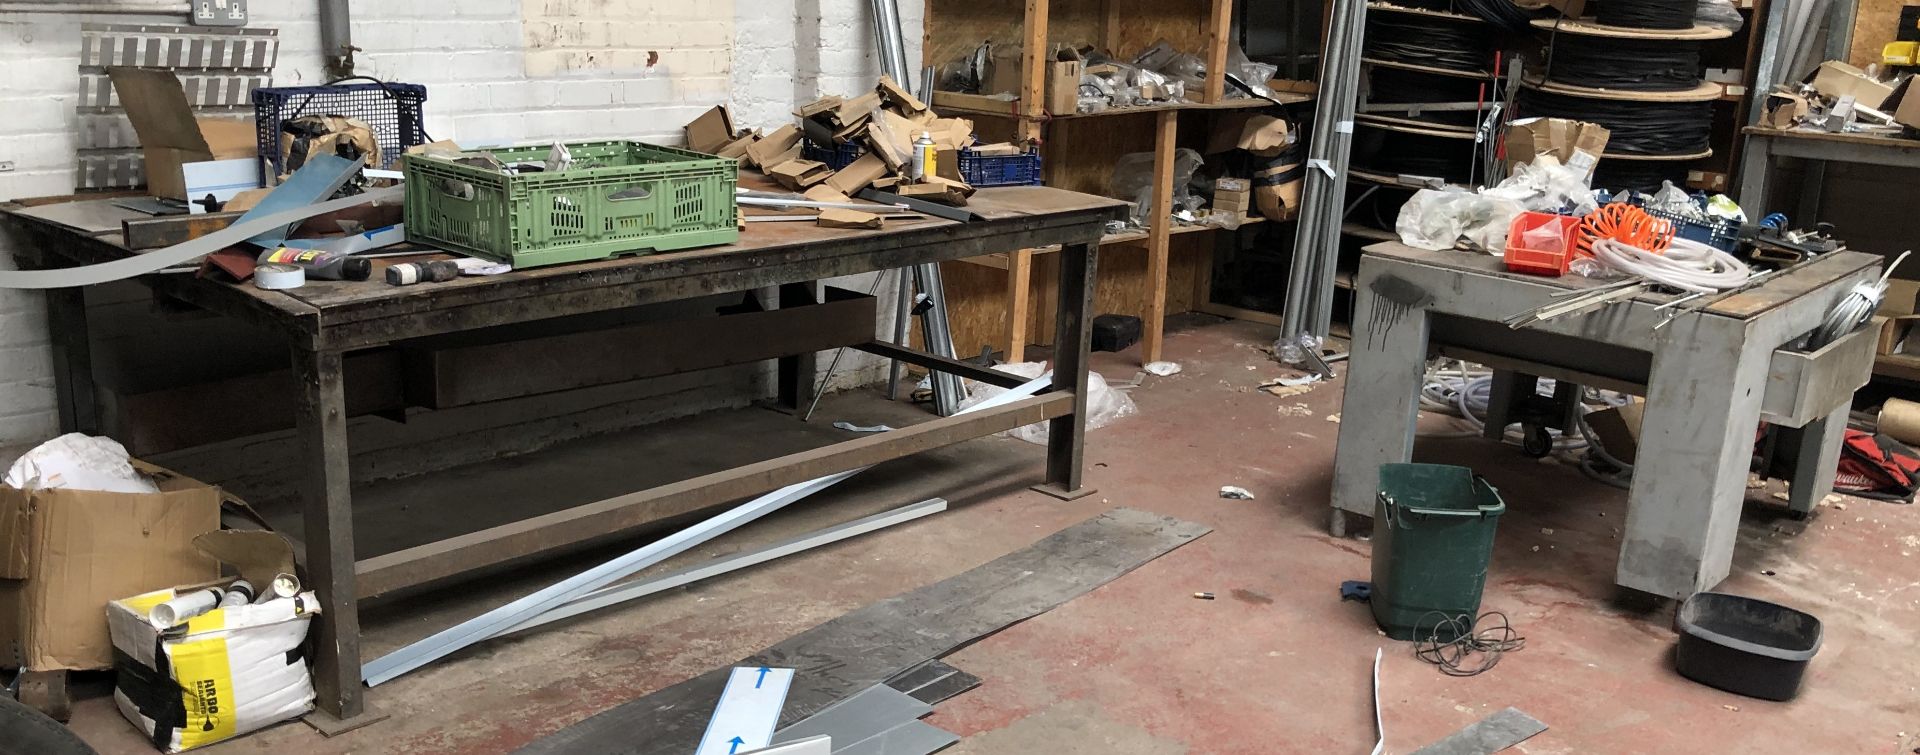 4 Steel Workbenches & Contents (Location: Swinton. Please Refer to General Notes)